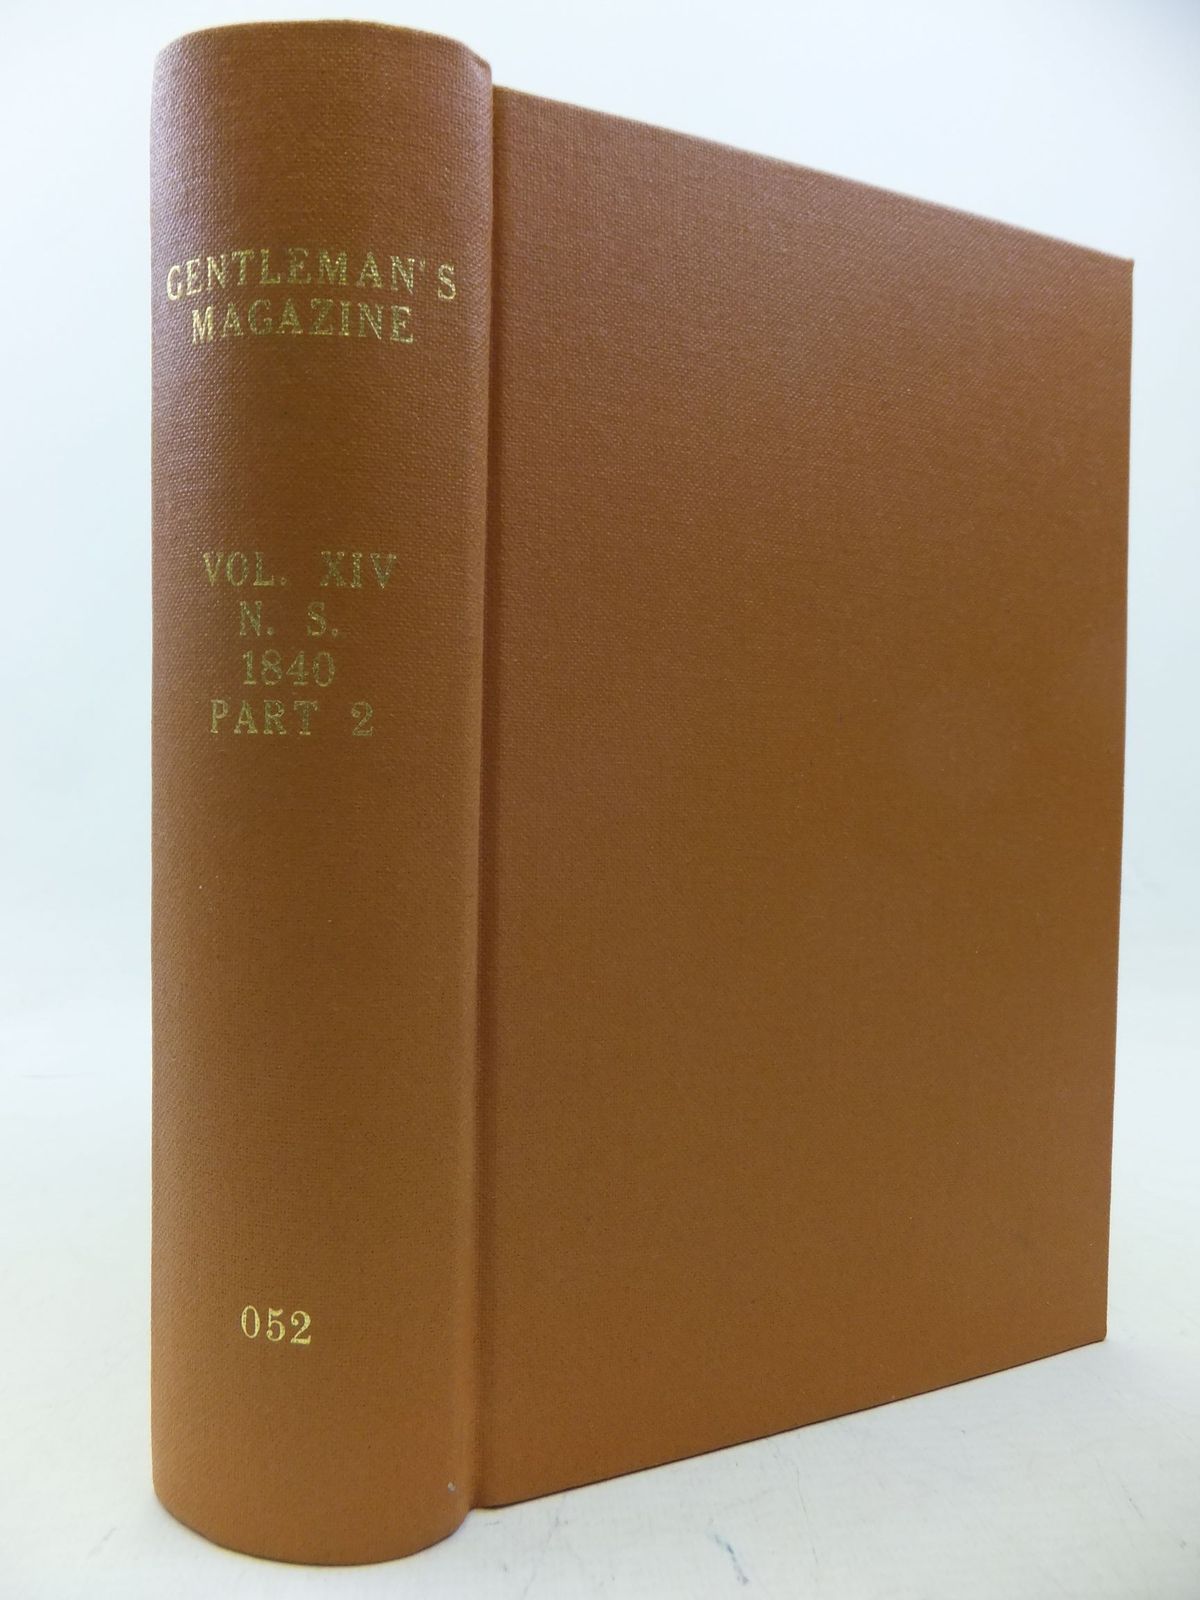 Photo of THE GENTLEMAN'S MAGAZINE VOLUME XIV 1840 written by Urban, Sylvanus published by William Pickering, John Bowyer Nichols And Son (STOCK CODE: 1710402)  for sale by Stella & Rose's Books